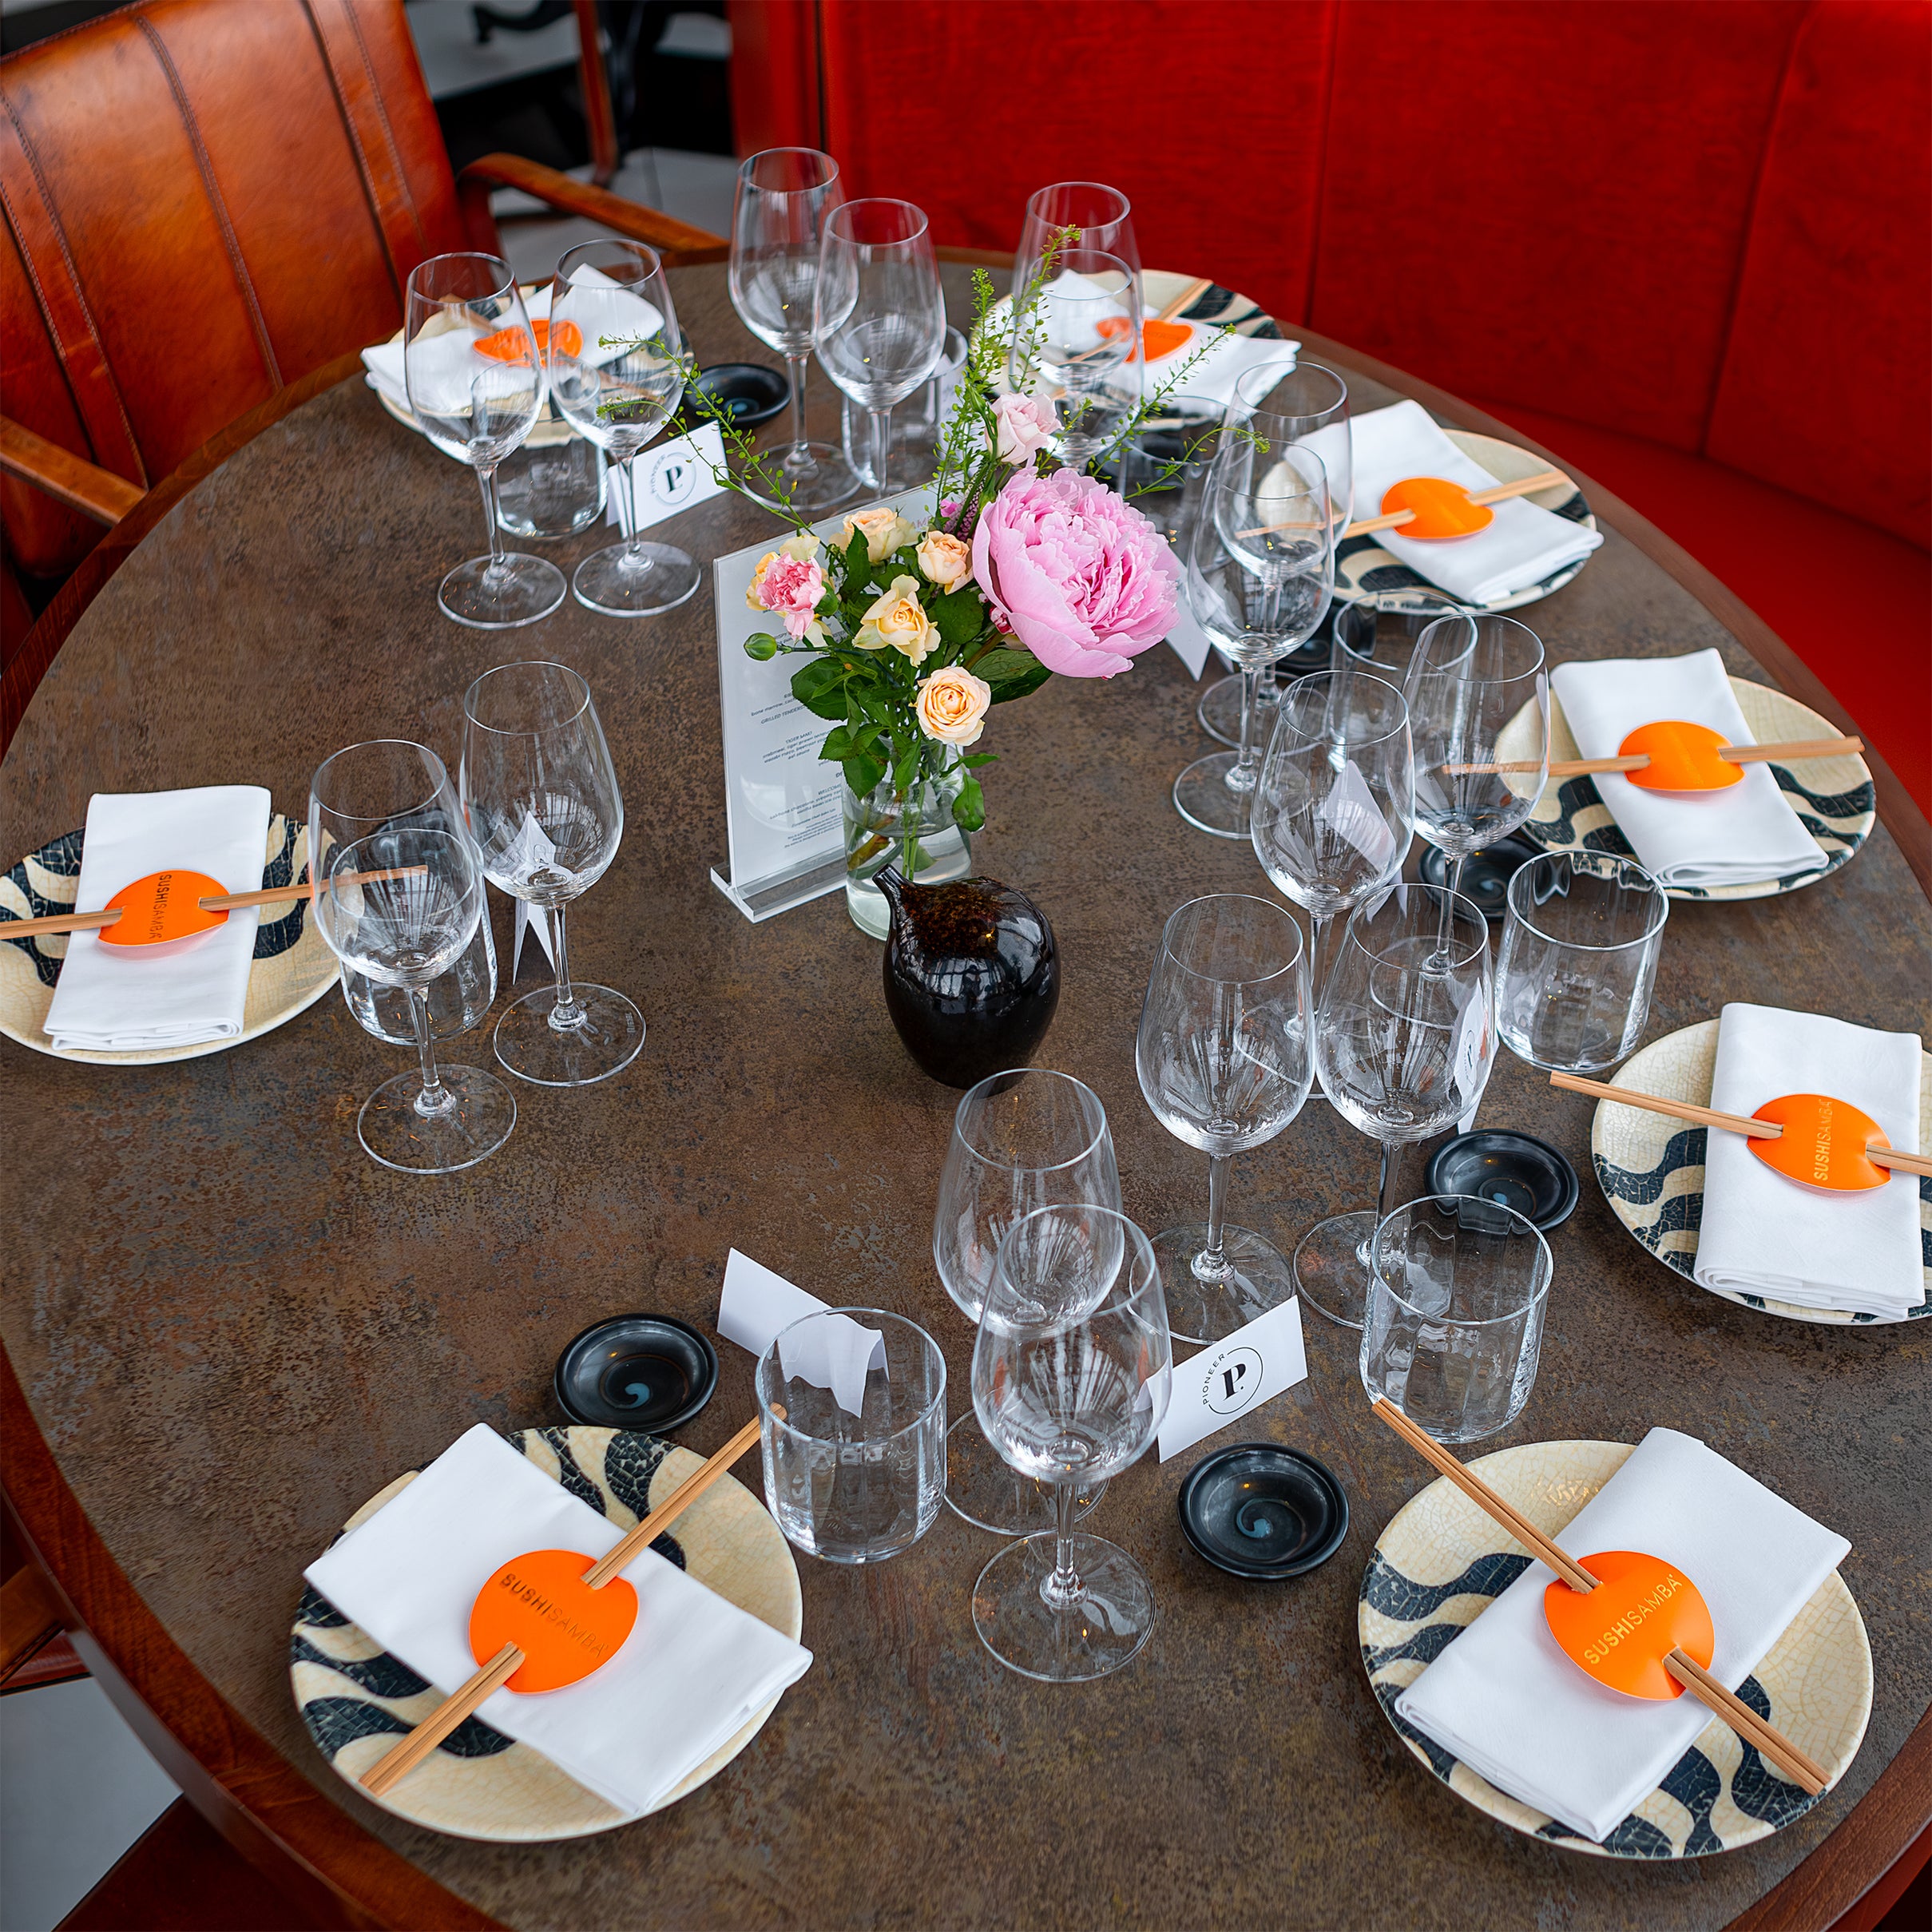 An elegantly decorated oval table set for a corporate event at SUSHISAMBA with floral arrangements by Amaranté London. The floral centrepiece includes pink peonies and roses, adding a touch of elegance and sophistication to the Chanel event.